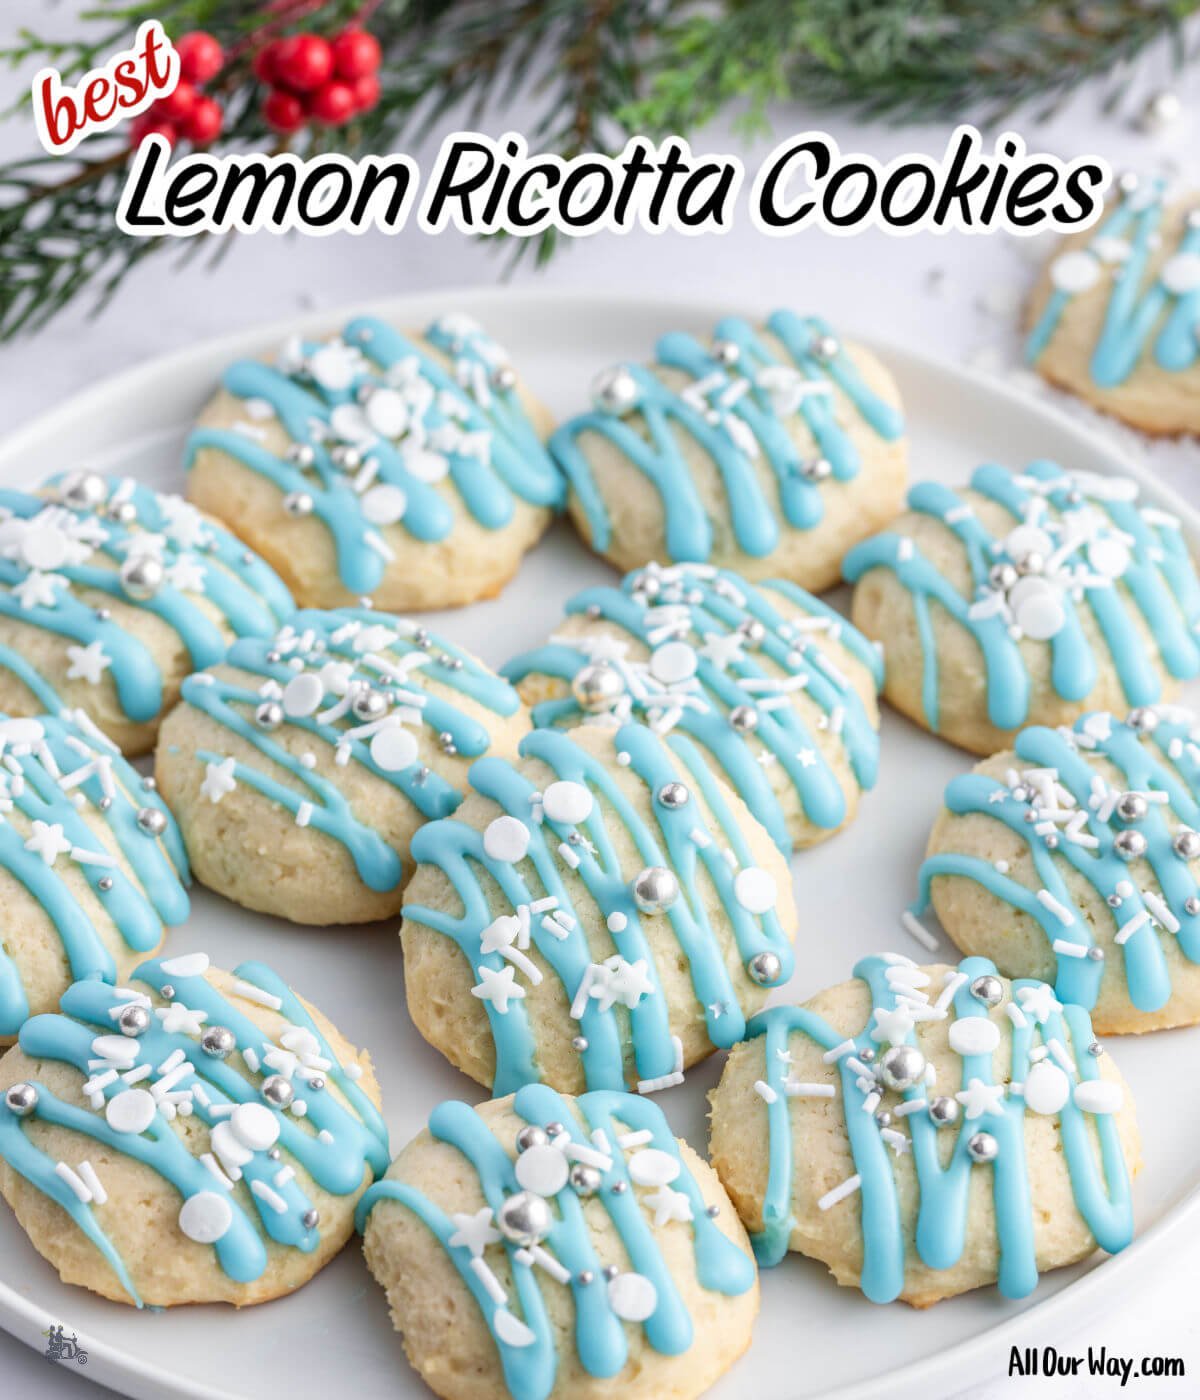 Alternate Social media image with title overlay for the lemon ricotta cookie recipe on a white plate and Christmas Greenery in the background.